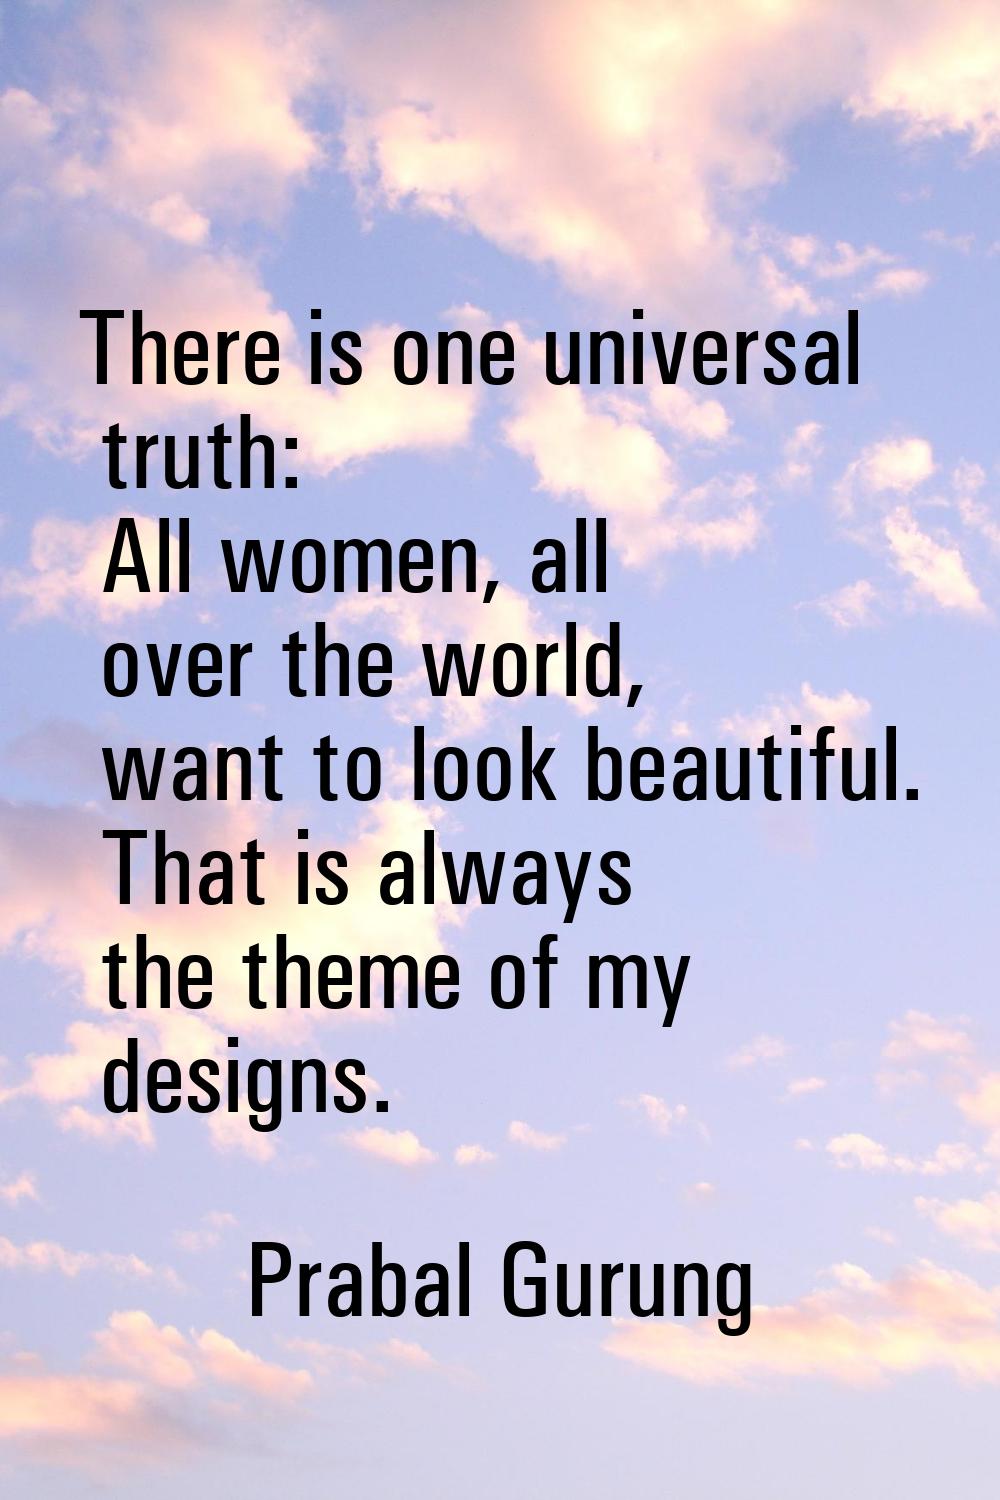 There is one universal truth: All women, all over the world, want to look beautiful. That is always